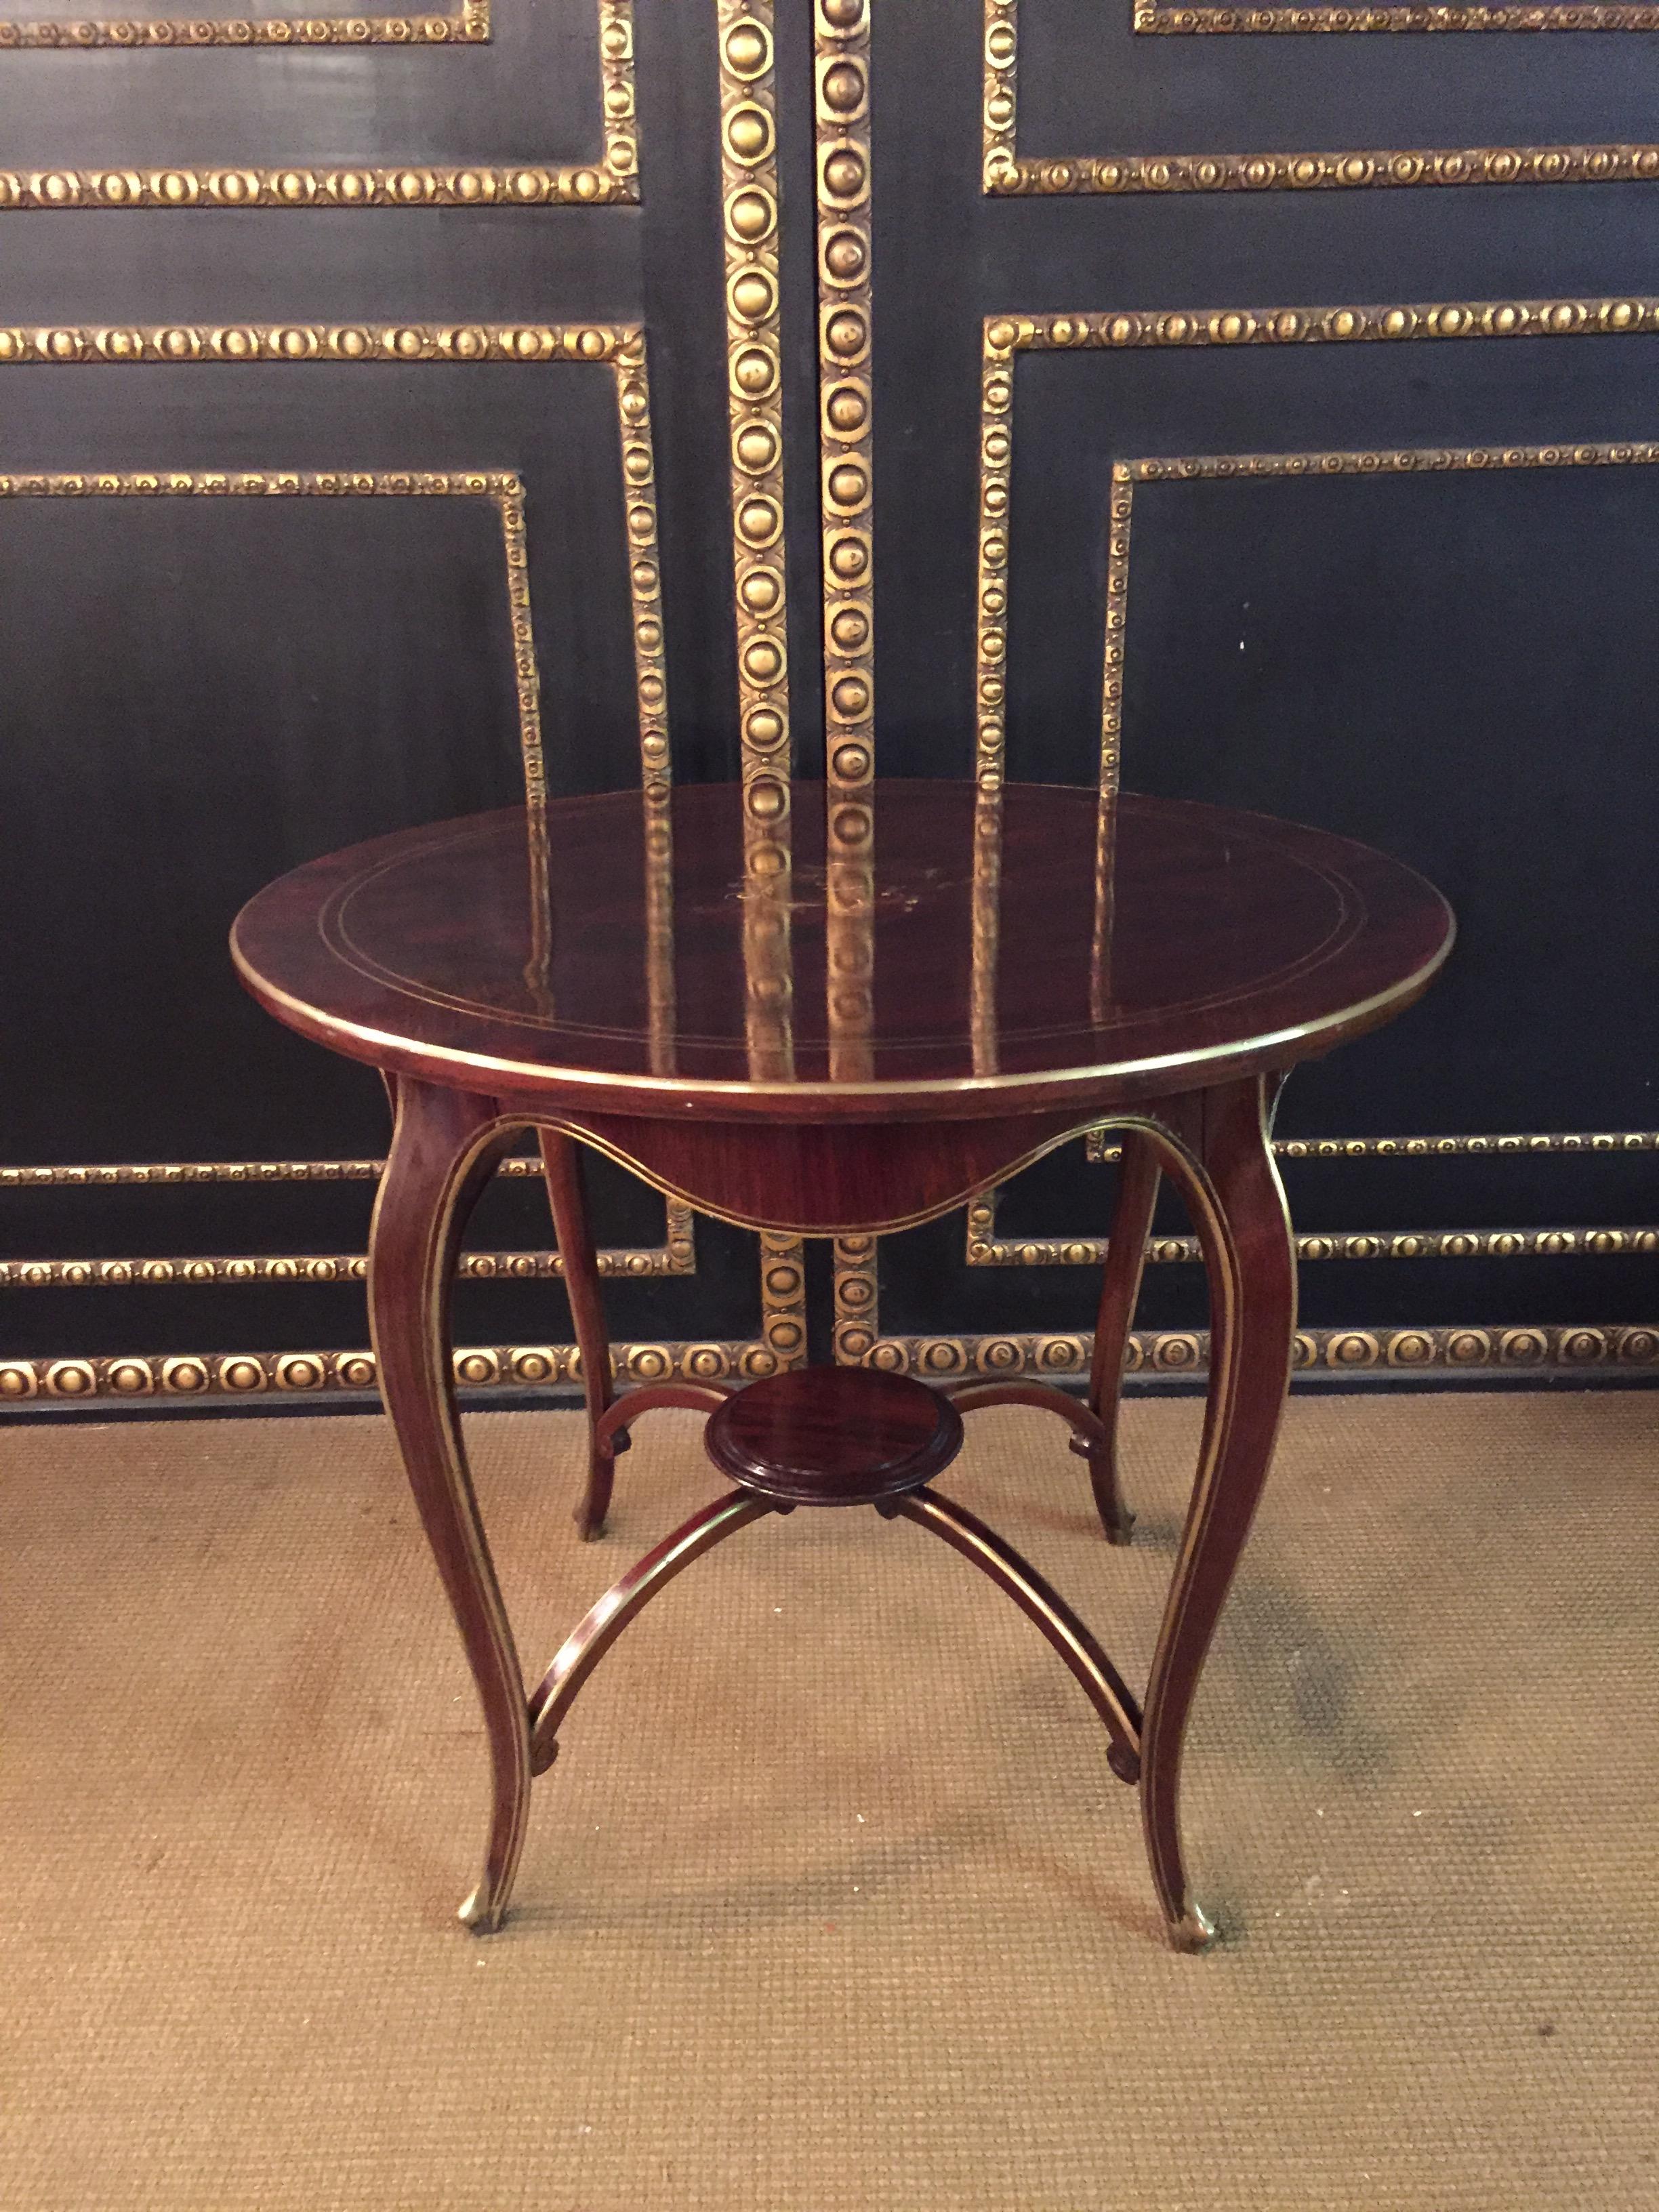 Solid wood a, partly blackened. Slightly protruding round cover plate on curved legs with fine brass framing connected by an intermediate plate.
The plate has fine inlays inserted above.